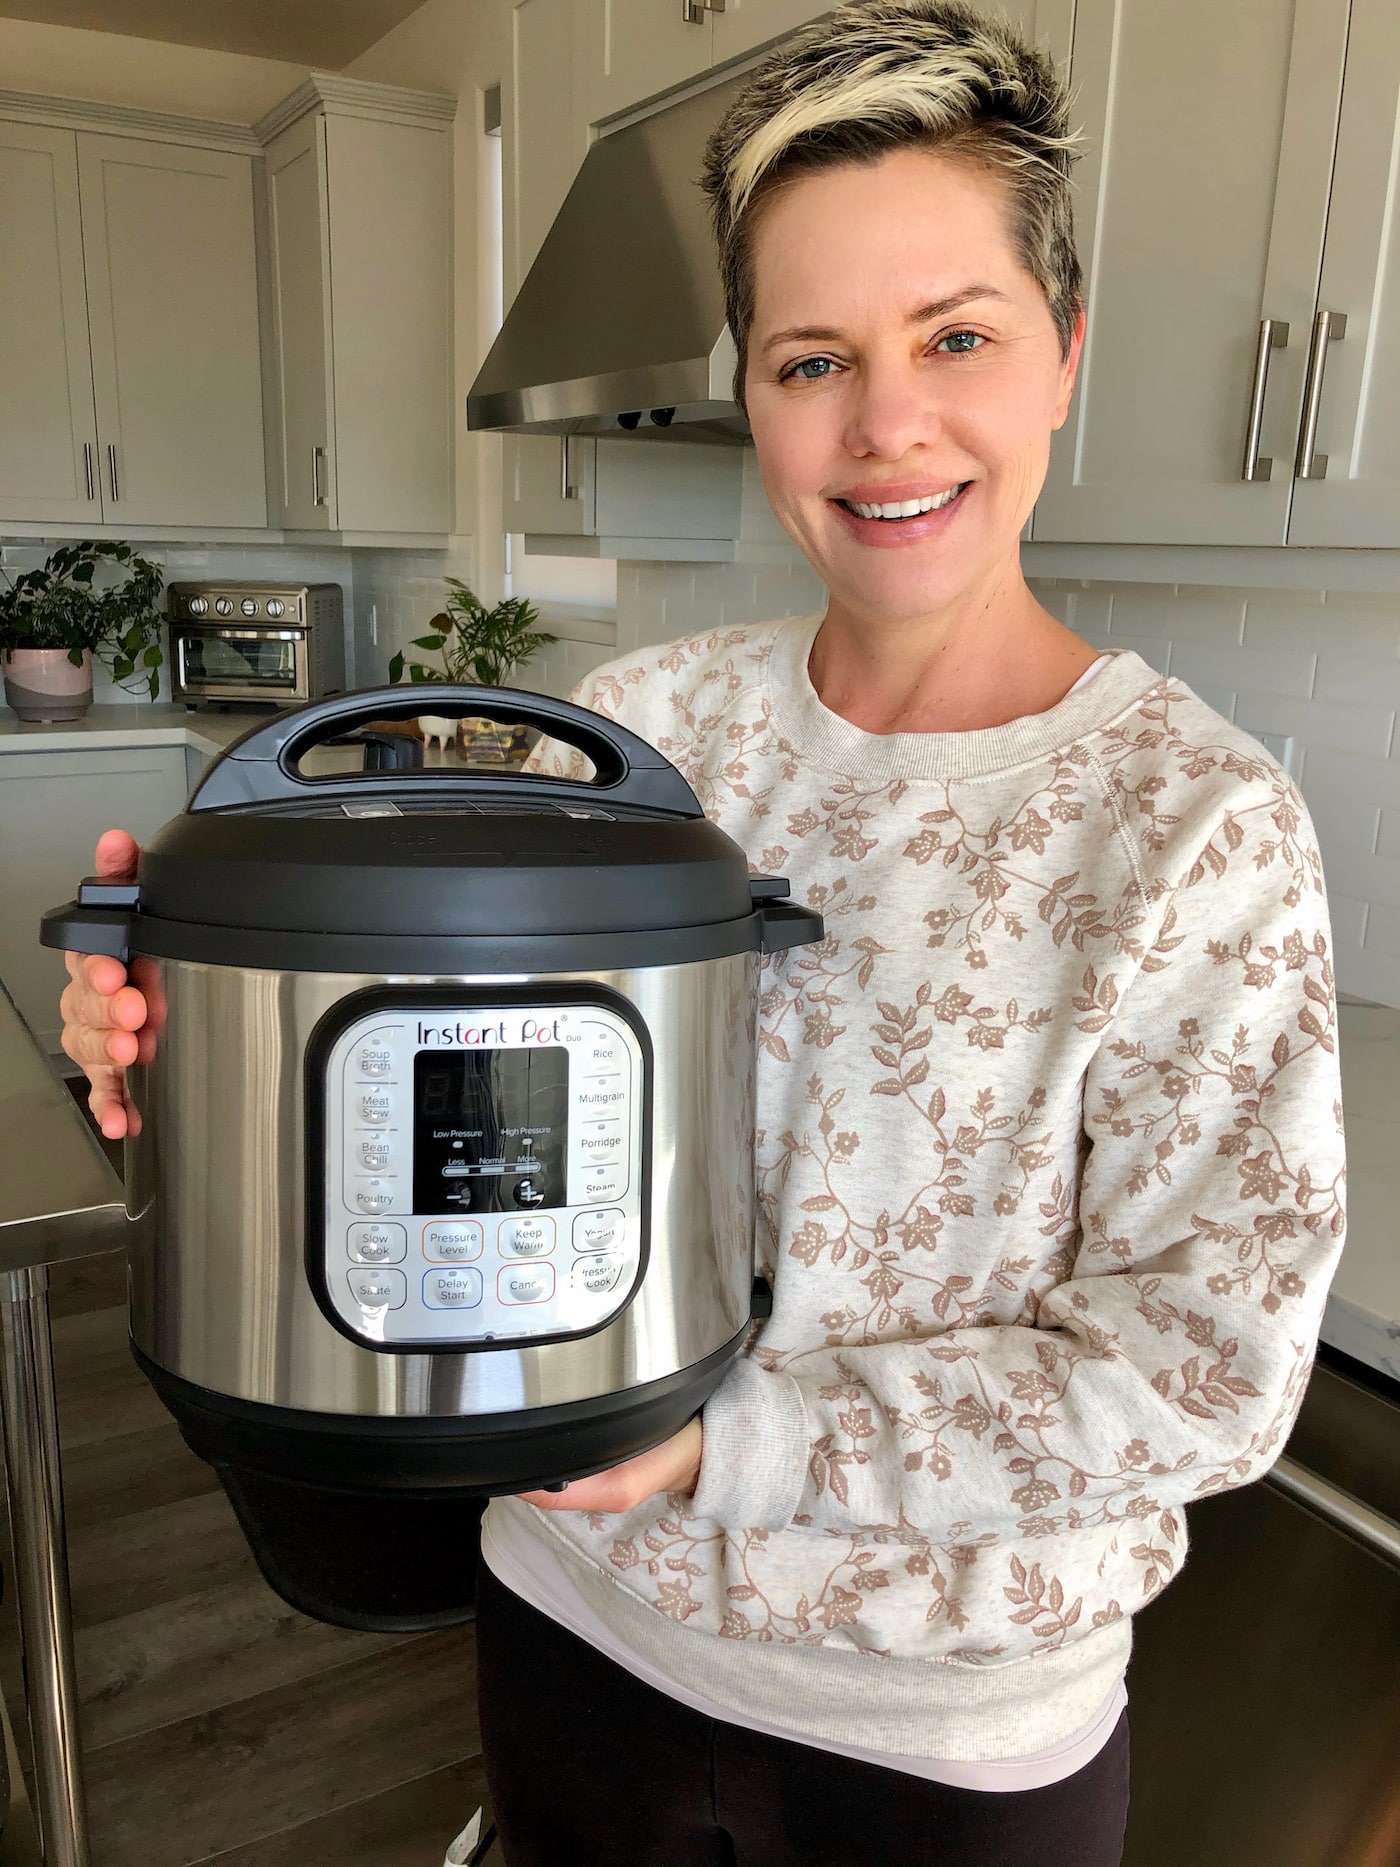 https://www.cleaneatingkitchen.com/wp-content/uploads/2021/02/carrie-holding-instant-pot-duo.jpeg